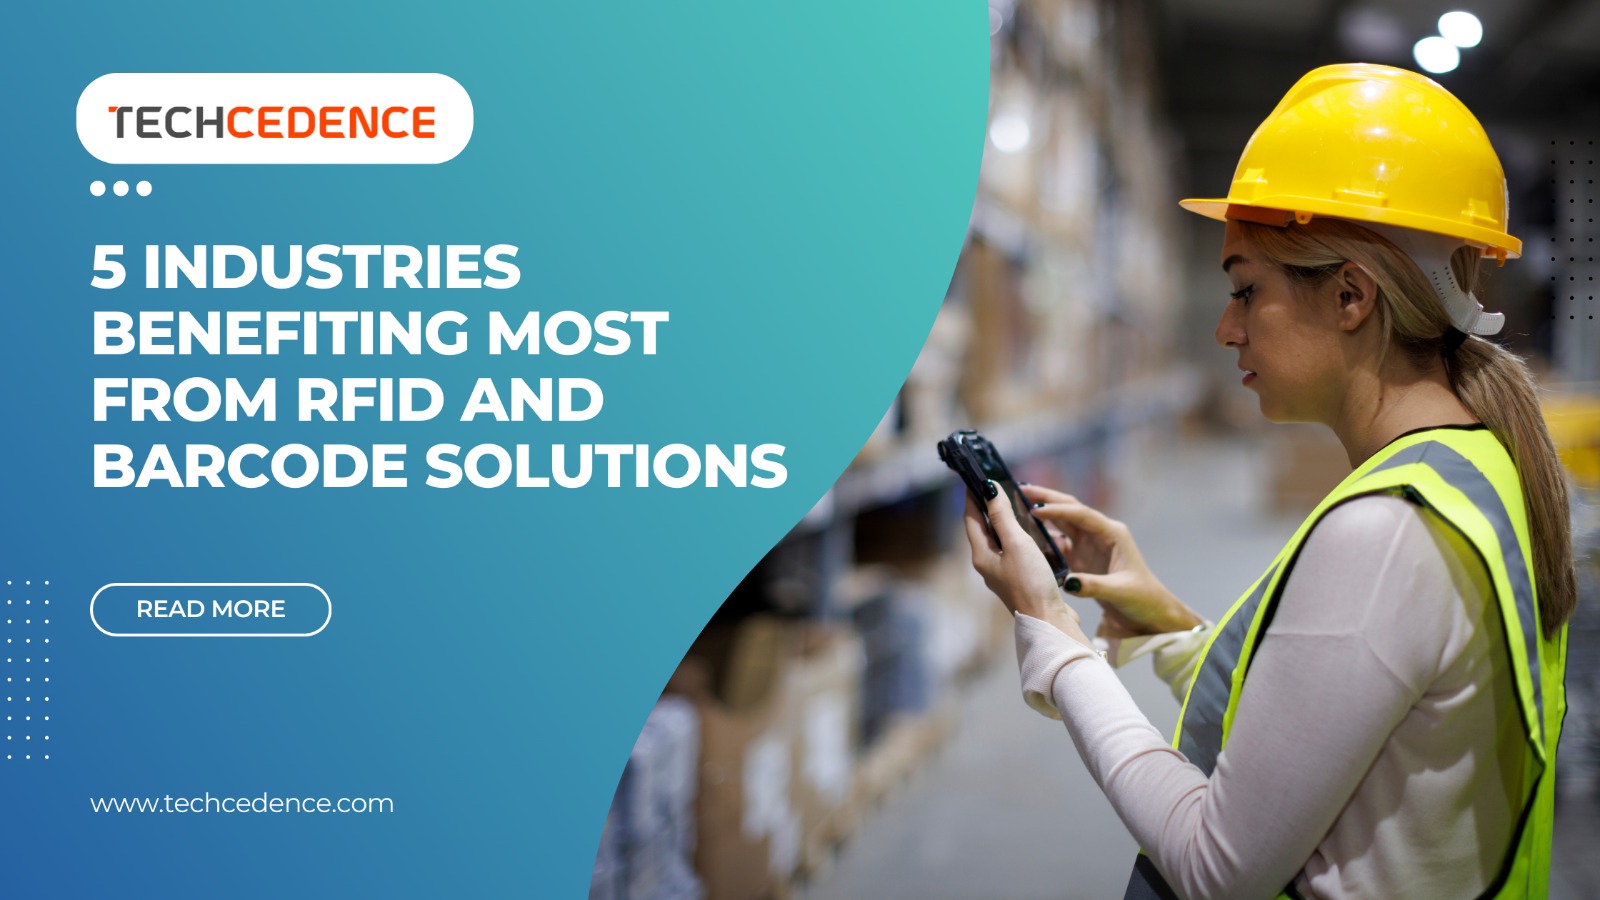 Five Industries Benefiting Most from RFID and Barcode Solutions